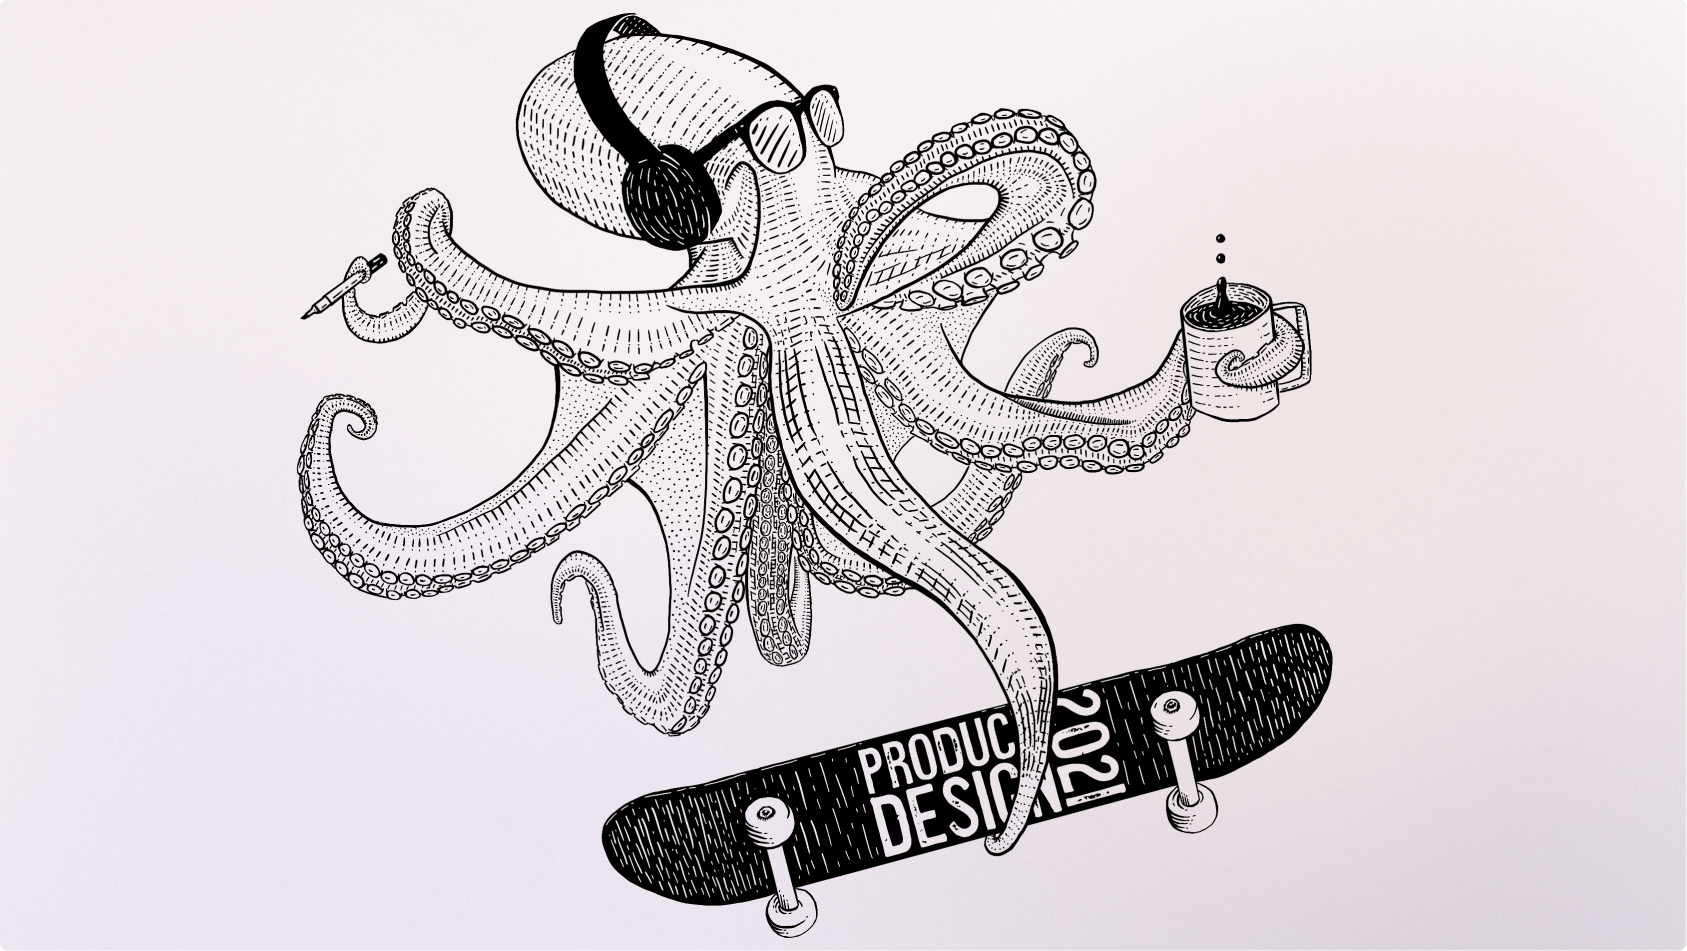 a black and white digital illustration of an octopus wearing headphones and glasses, holding a coffee in one tentacle and a whiteboard marker in another, while riding a skateboard that says product design 2021